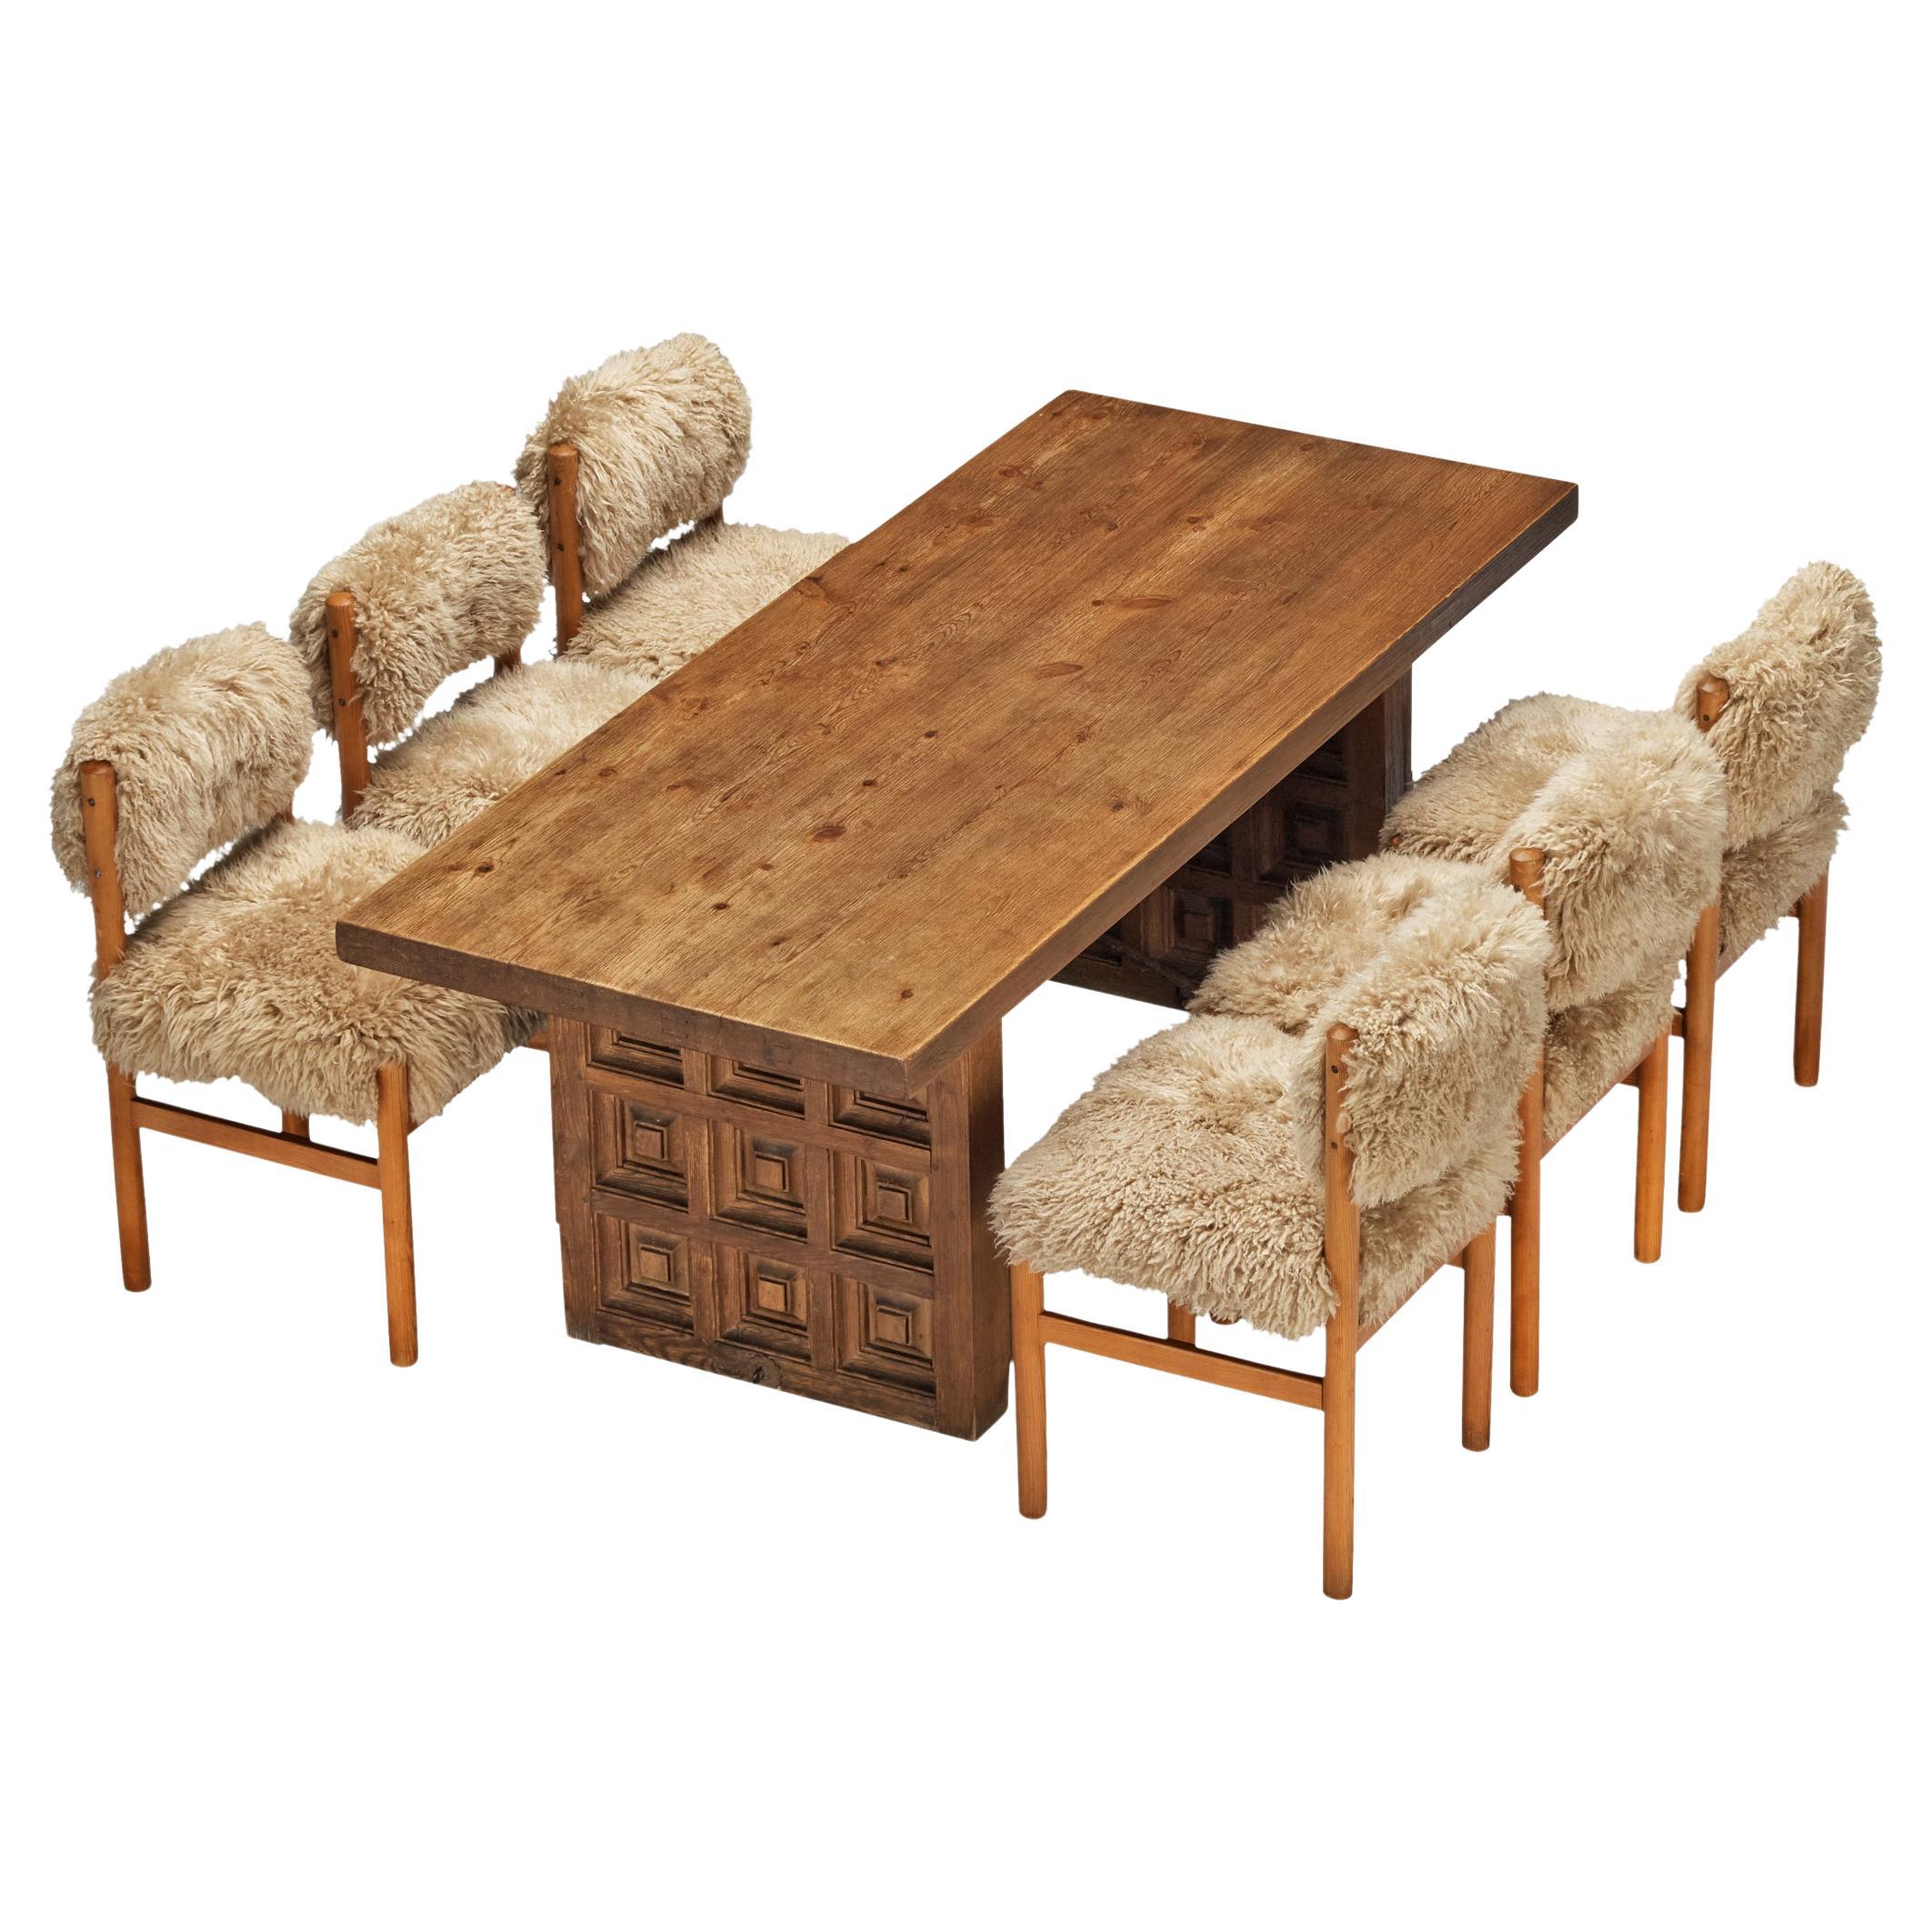 Dining Room Set with Biosca Spanish Dining Table and Chairs in Sheepskin 